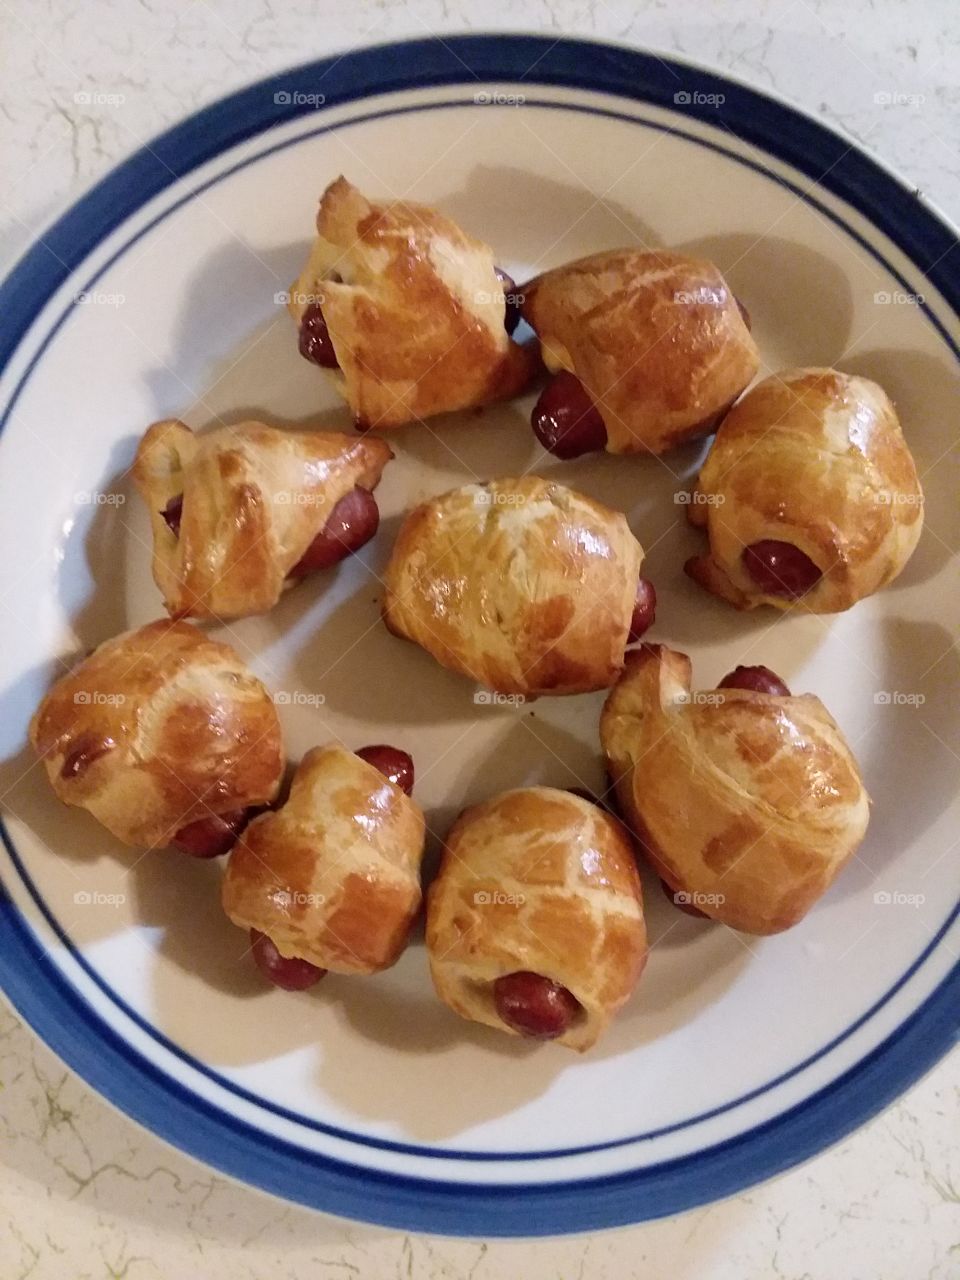 Pigs in blankets on a dinner plate